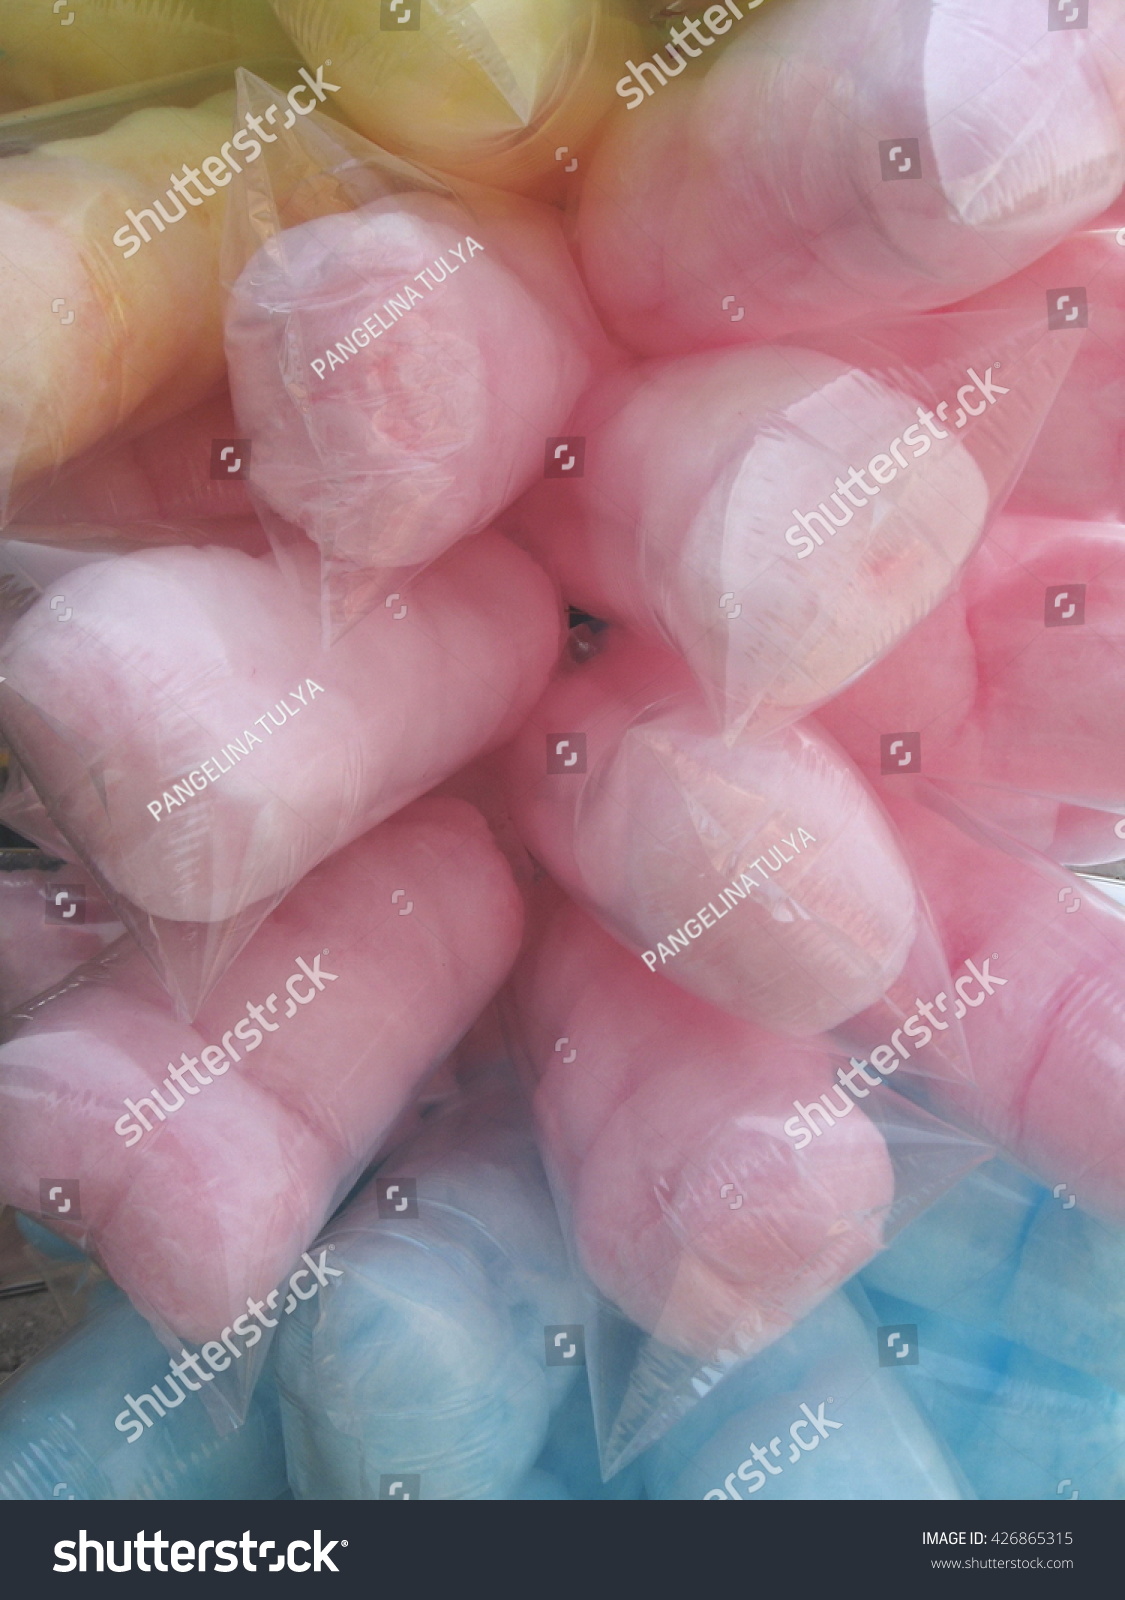 Download Pink Yellow Blue Cotton Candy Plastic Stock Photo Edit Now 426865315 PSD Mockup Templates